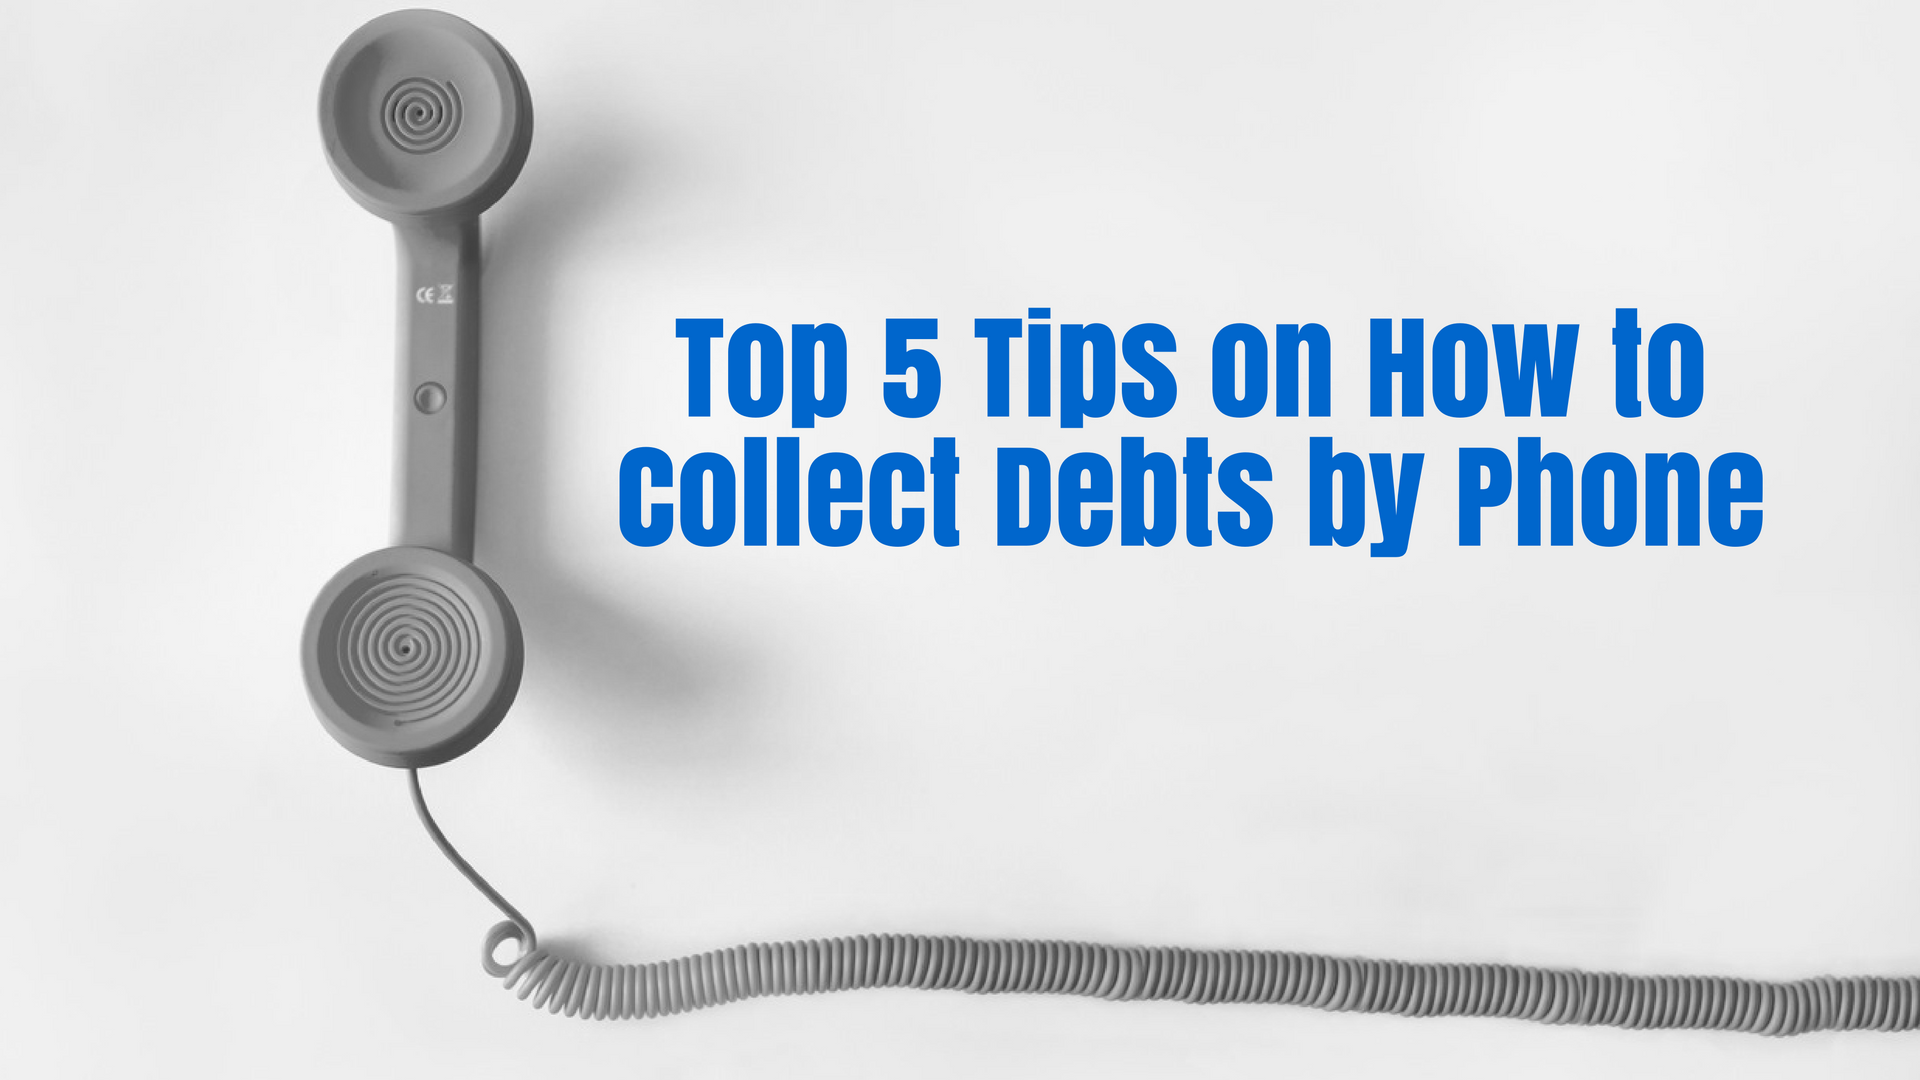 Top 5 Tips on How to Collect Debts by Phone